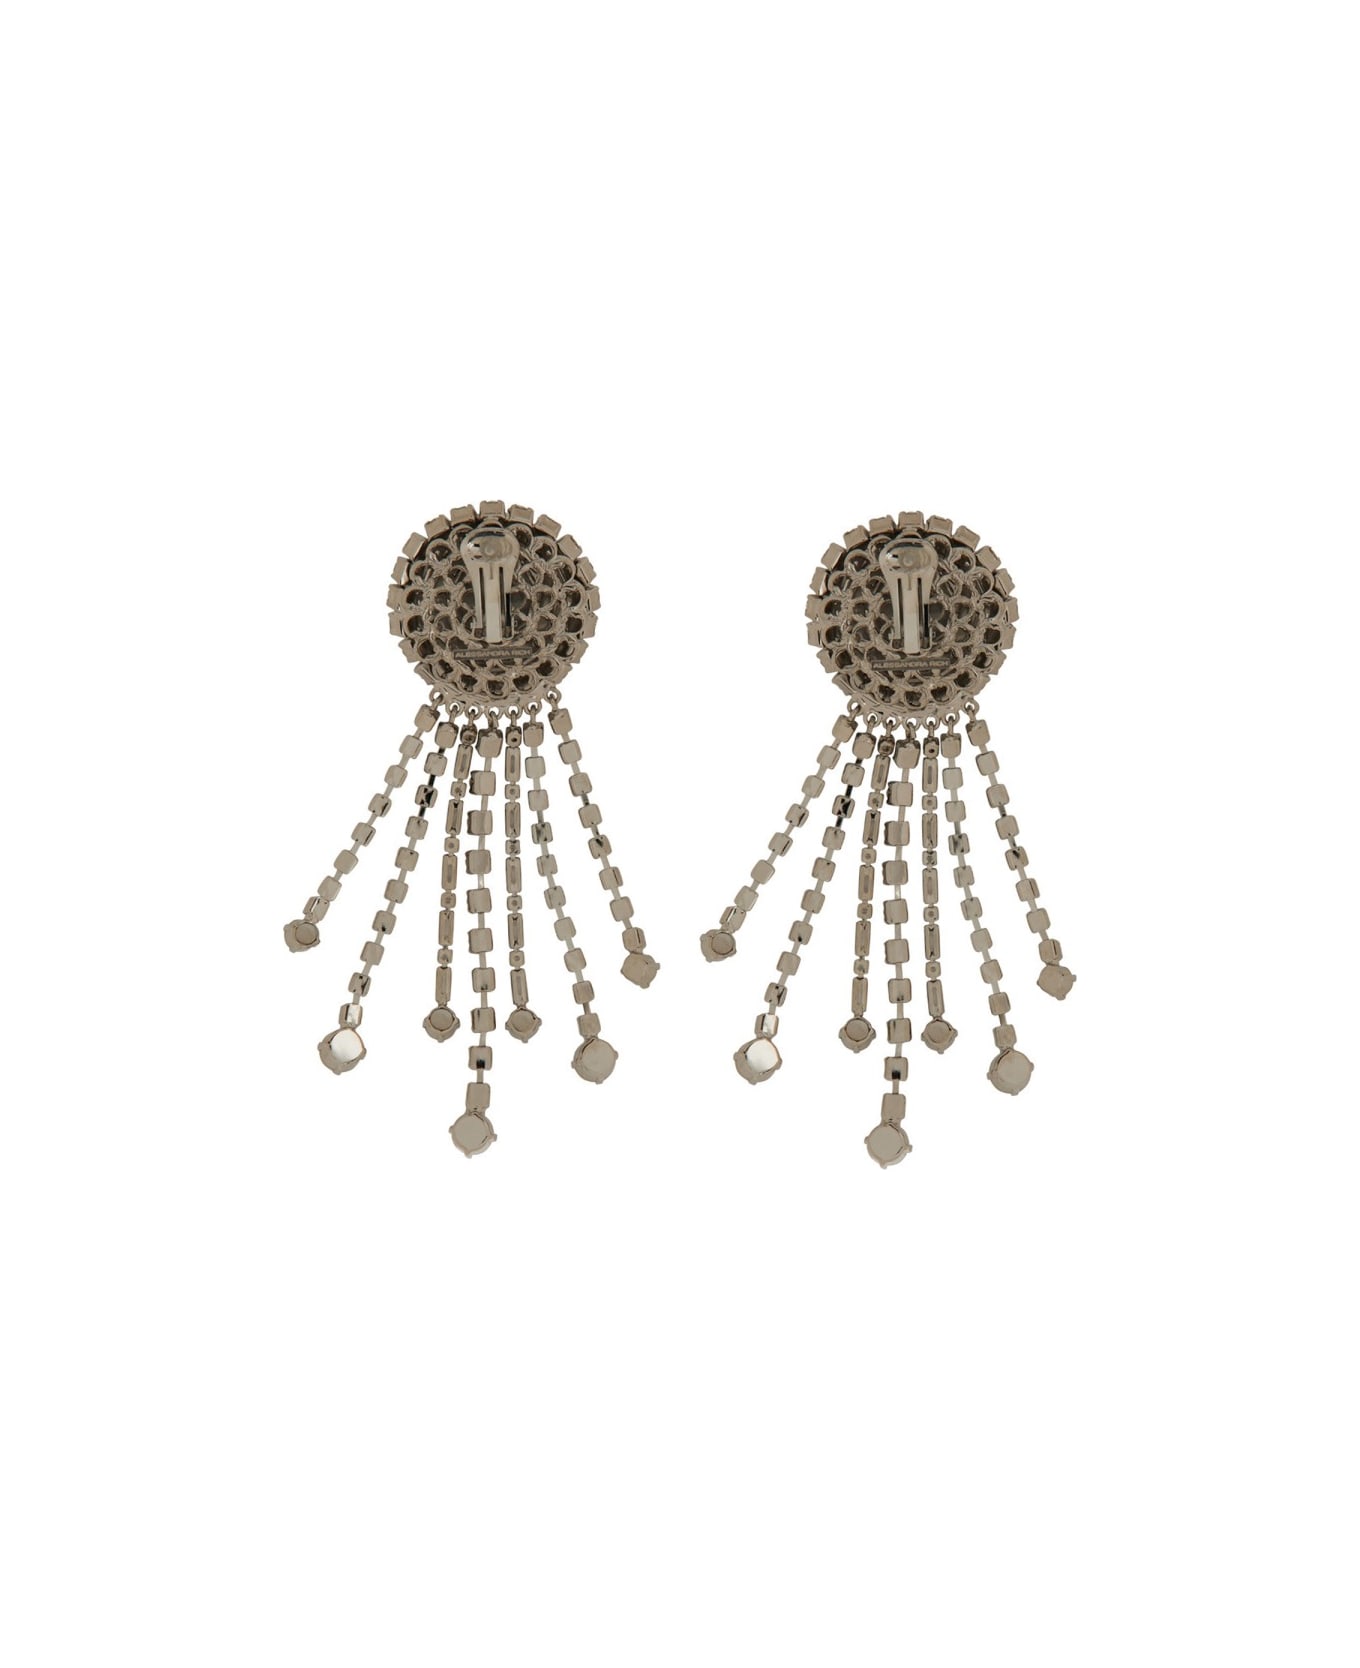 Alessandra Rich Round Clip-on Earrings - SILVER